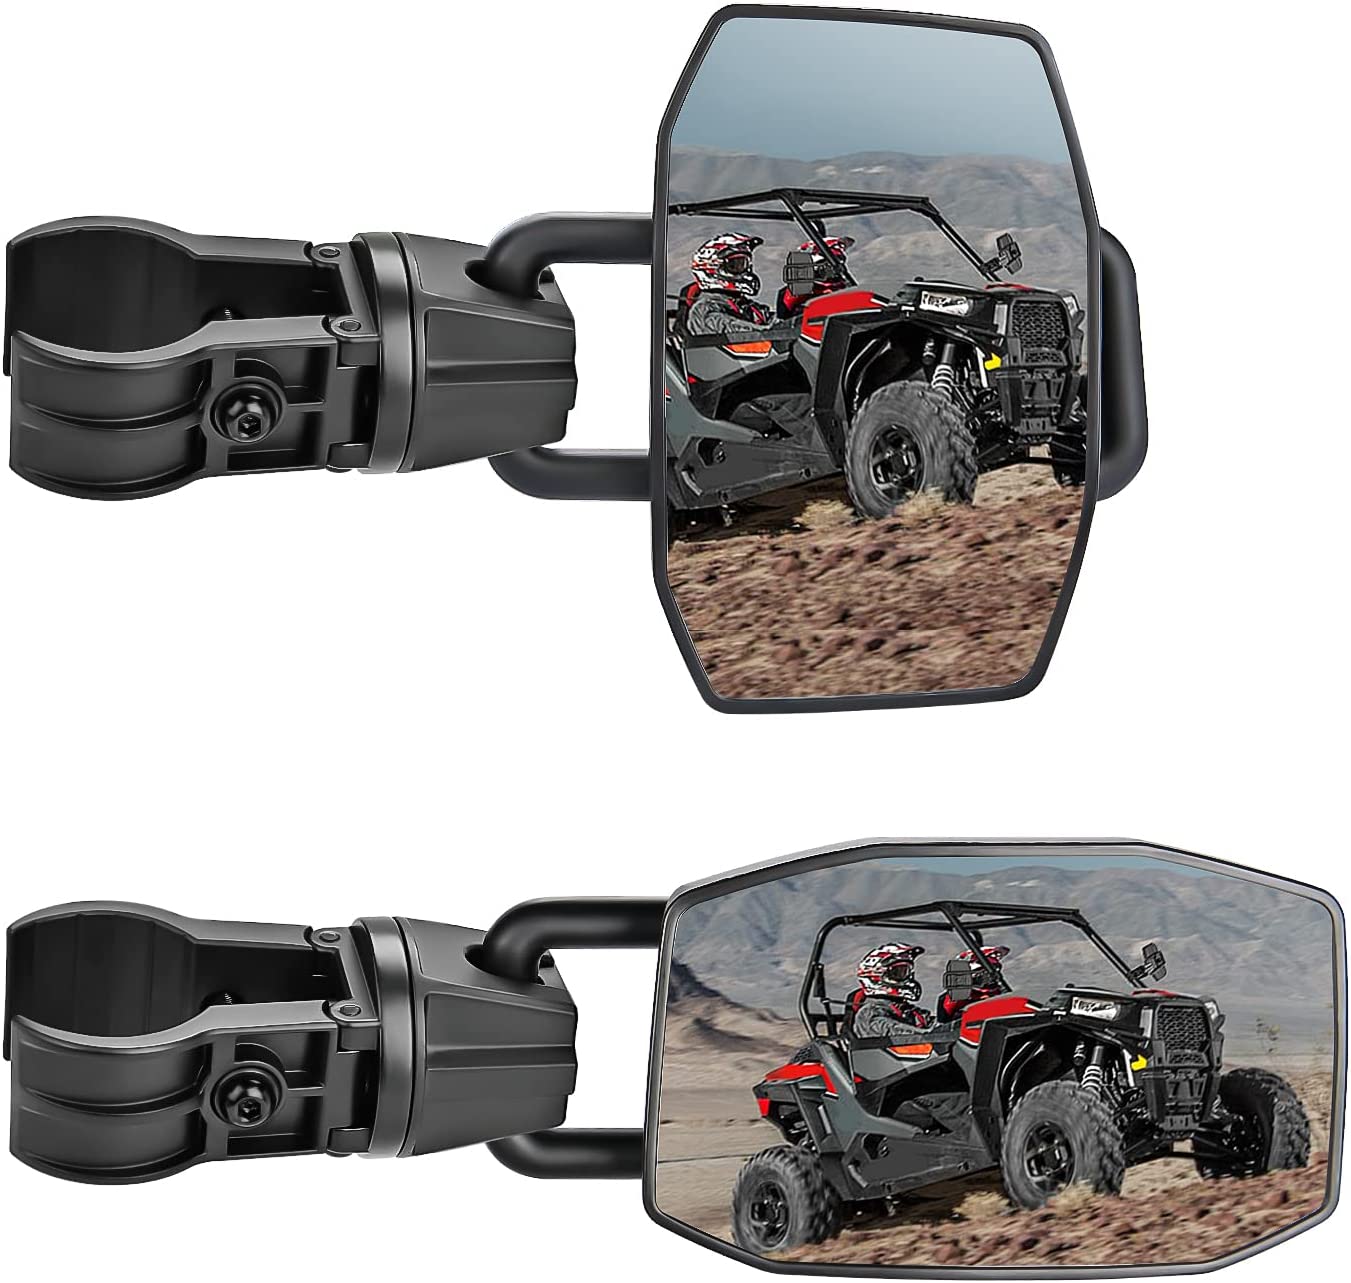 UTV Side Mirrors Fit 1.75"to 2" Roll Bar Cage, Aluminum Solid Side View Mirrors Compatible with Polaris RZR Can Am Maverick X3 Talon Pioneer 1000 Wolverine Kawasaki Teryx SXS